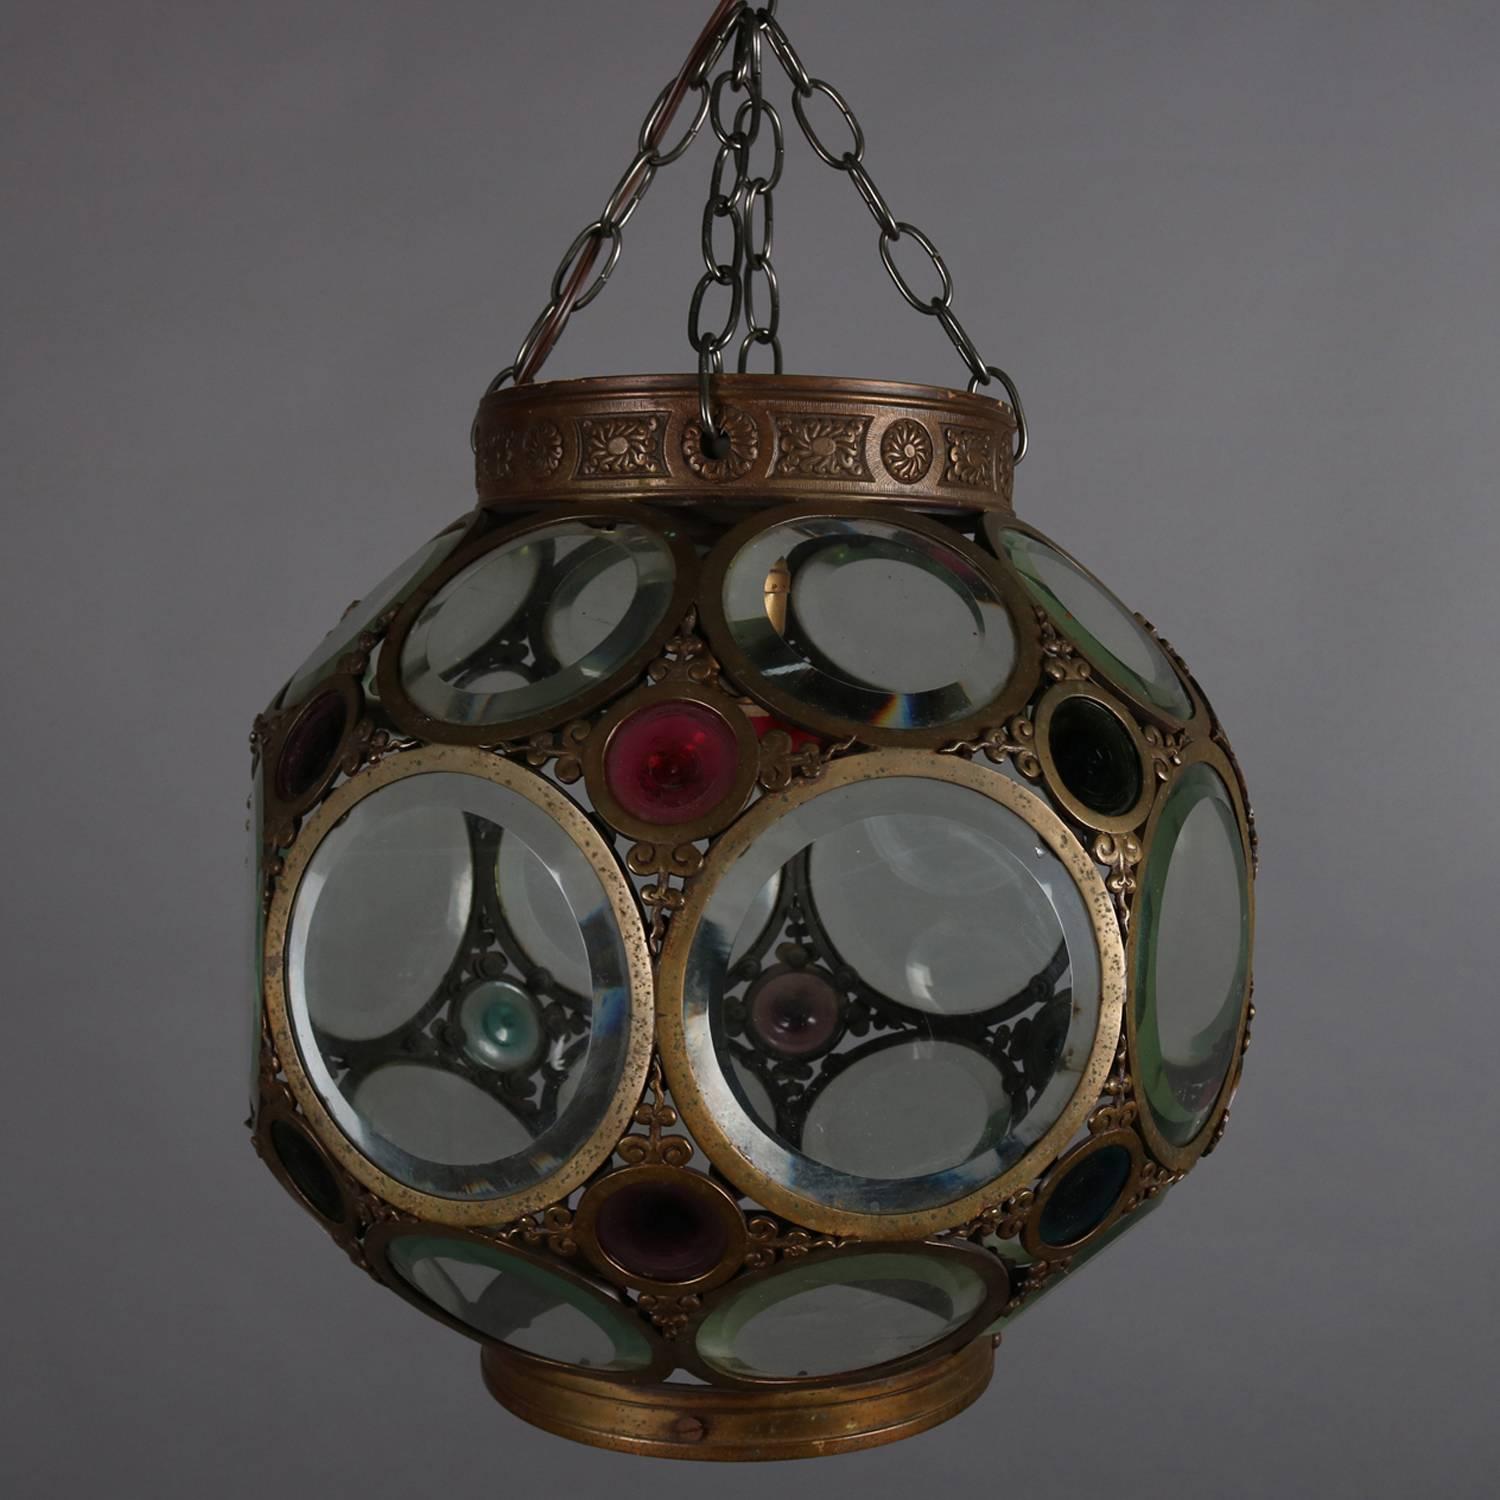 20th Century Large Aesthetic Movement Belchers School Bronzed and Jeweled Hanging Light